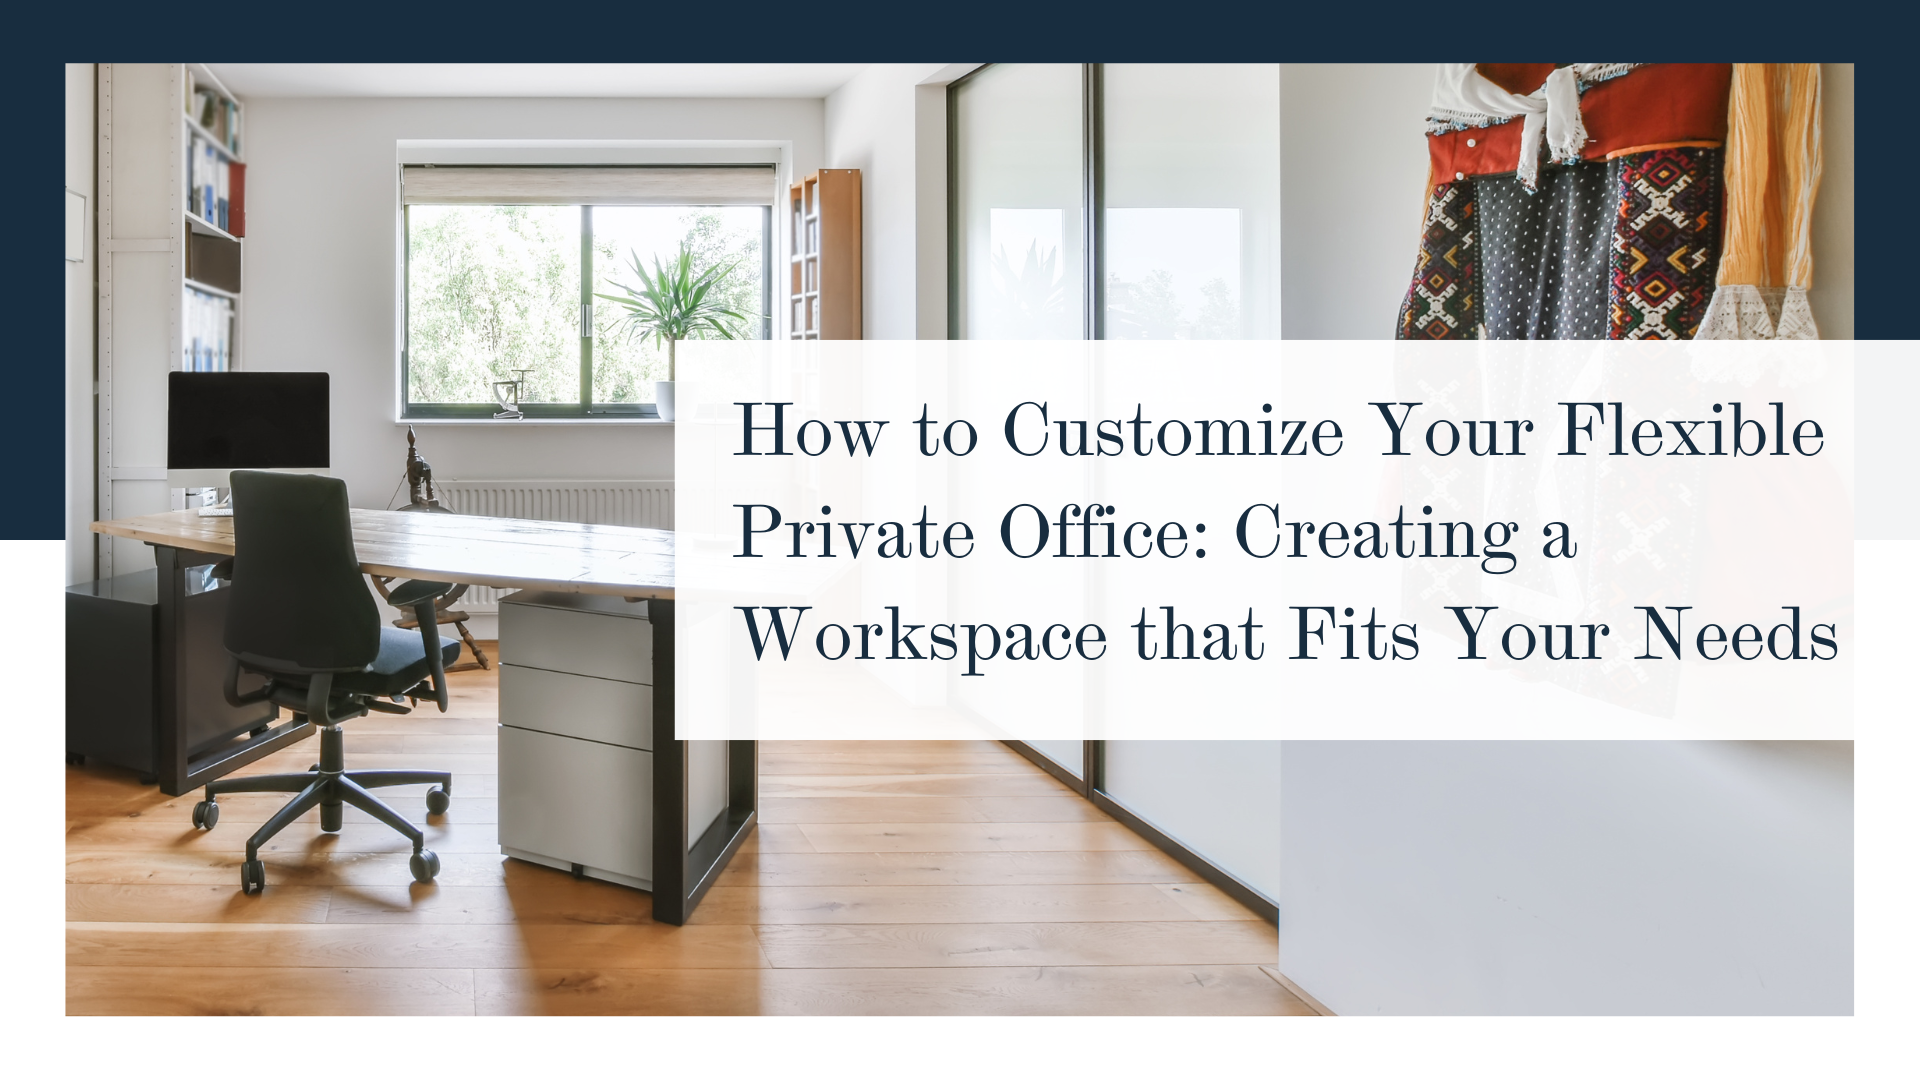 How to customize your flexible private office